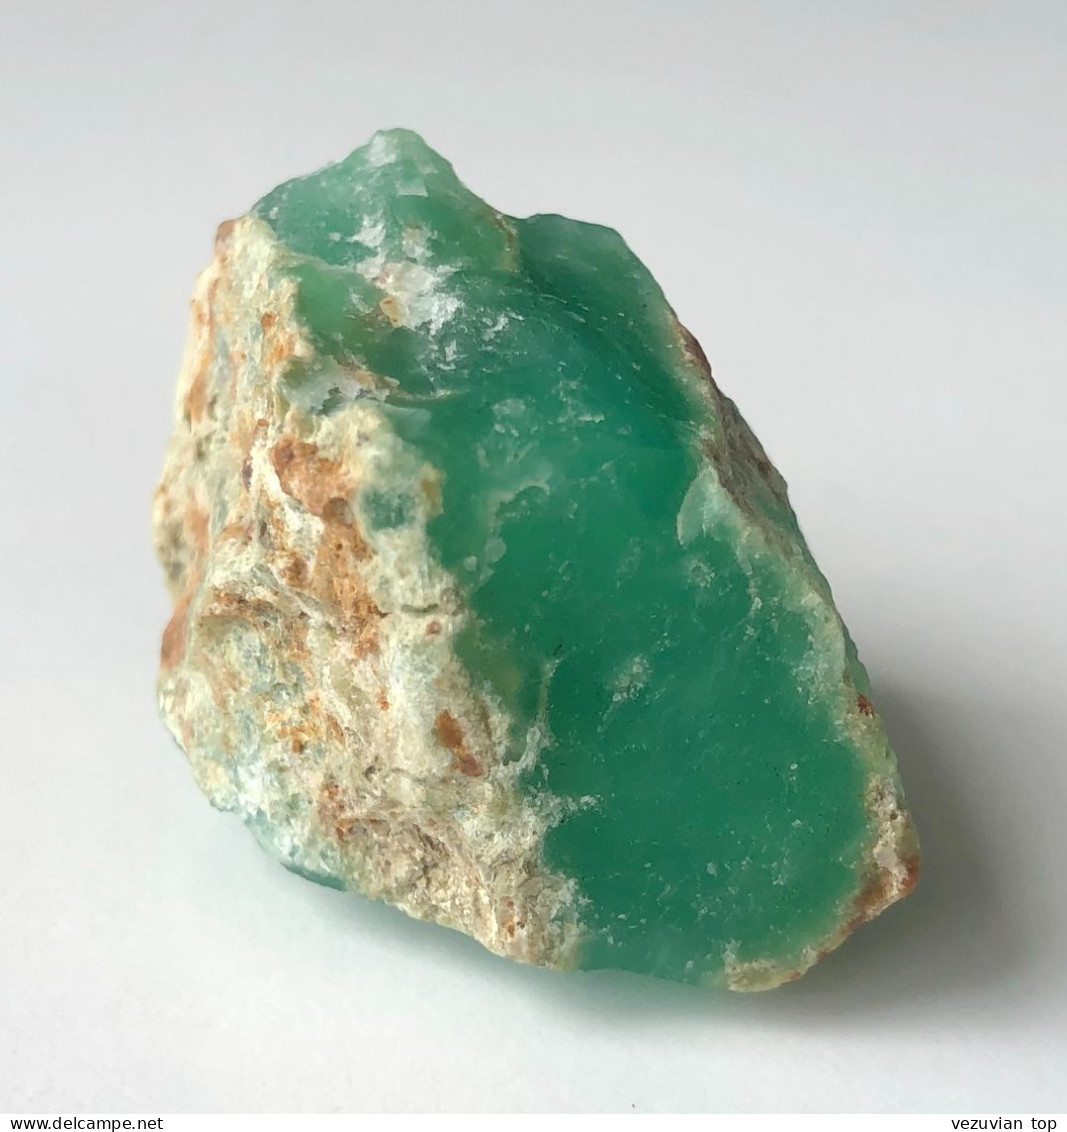 Chrysoprase, good quality specimen with deep rich green color